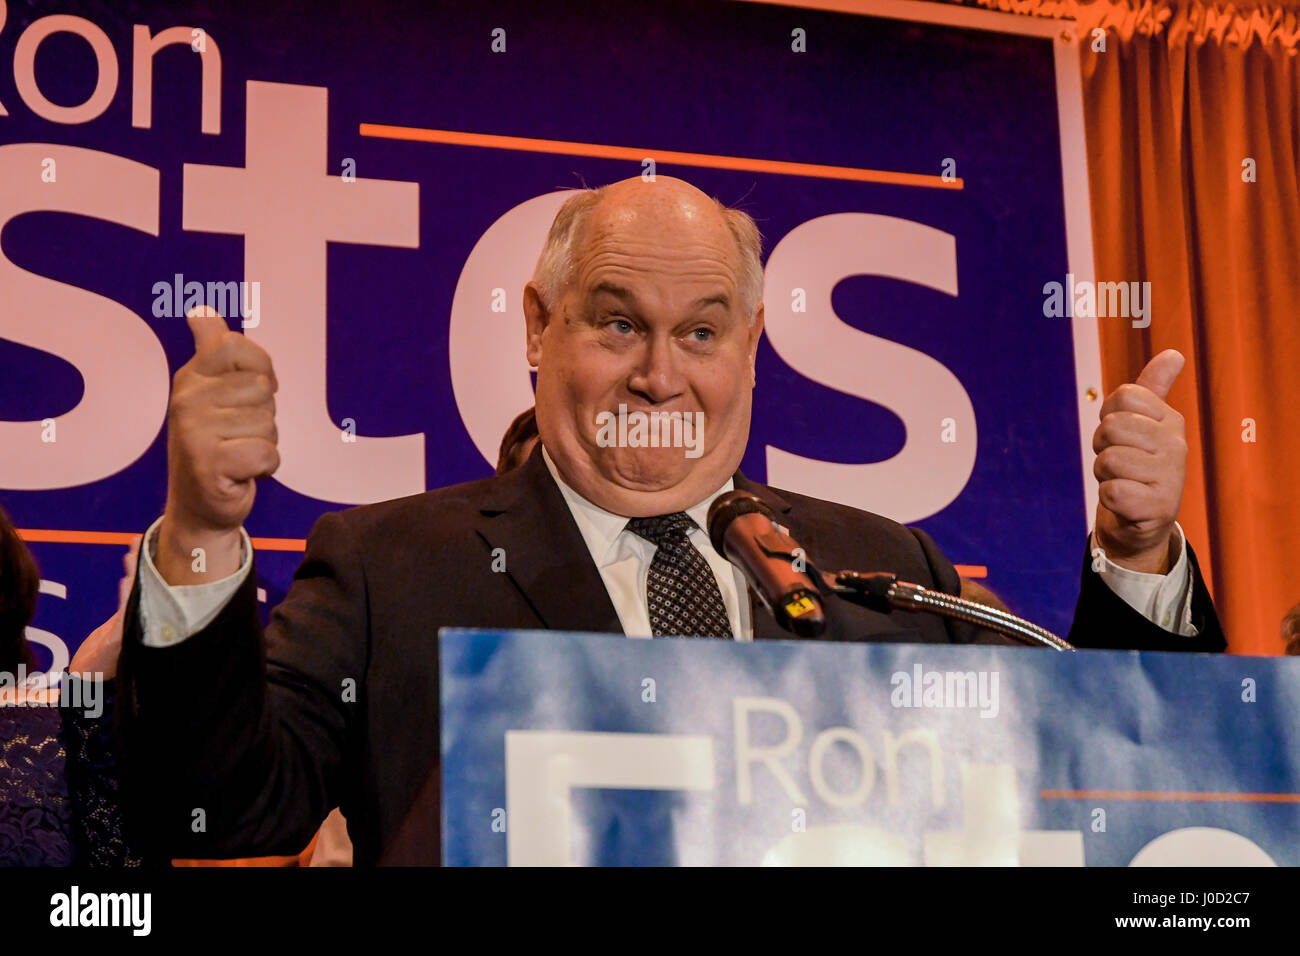 Wichita, U.S. 11th Apr, 2017. Republican Ron Estes the current Kansas State Treasurer wins the special election to fill the 4th congressional seat left vacant by Mike Pompeo appointment as the director of the CIA, Wichita Kansas, April 11, 2017. Credit: mark reinstein/Alamy Live News Stock Photo